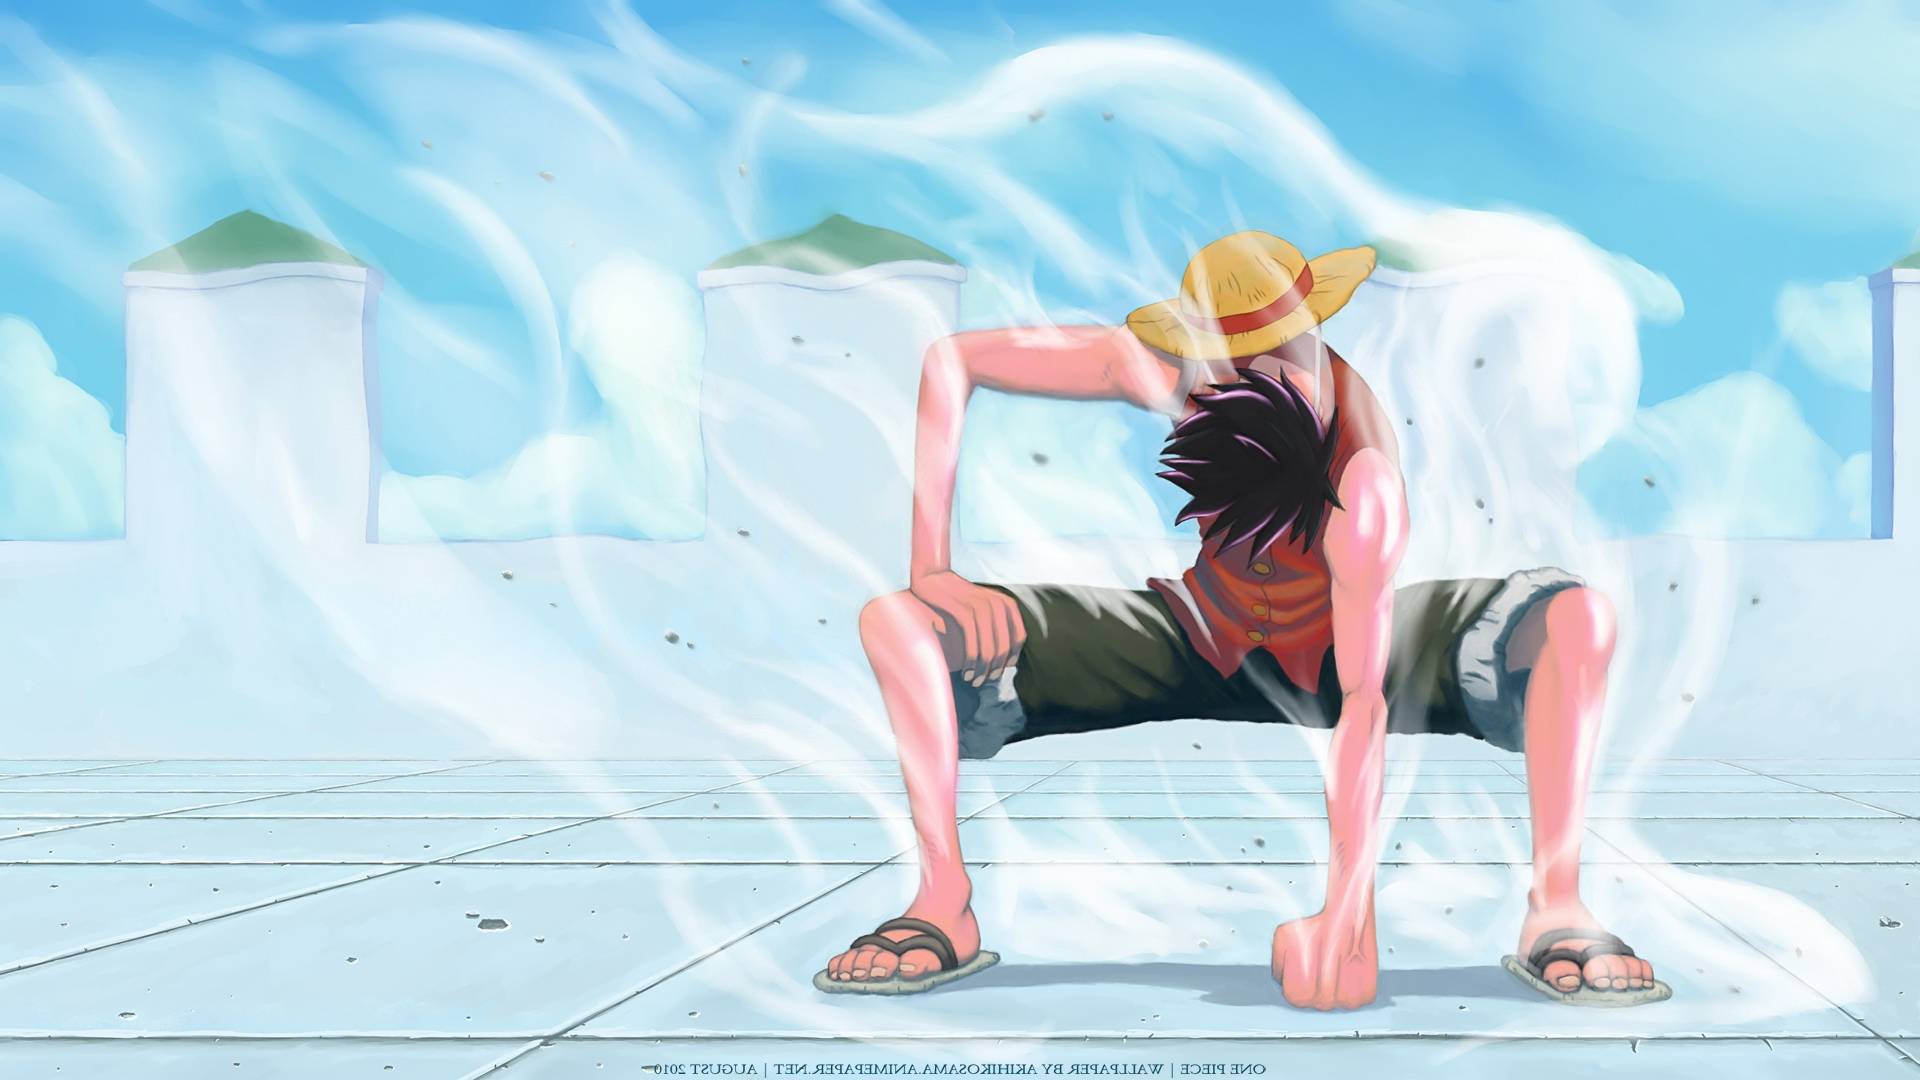 1080P Luffy Gear 5 Wallpaper Hd : * Use The Images As Wallpaper Or